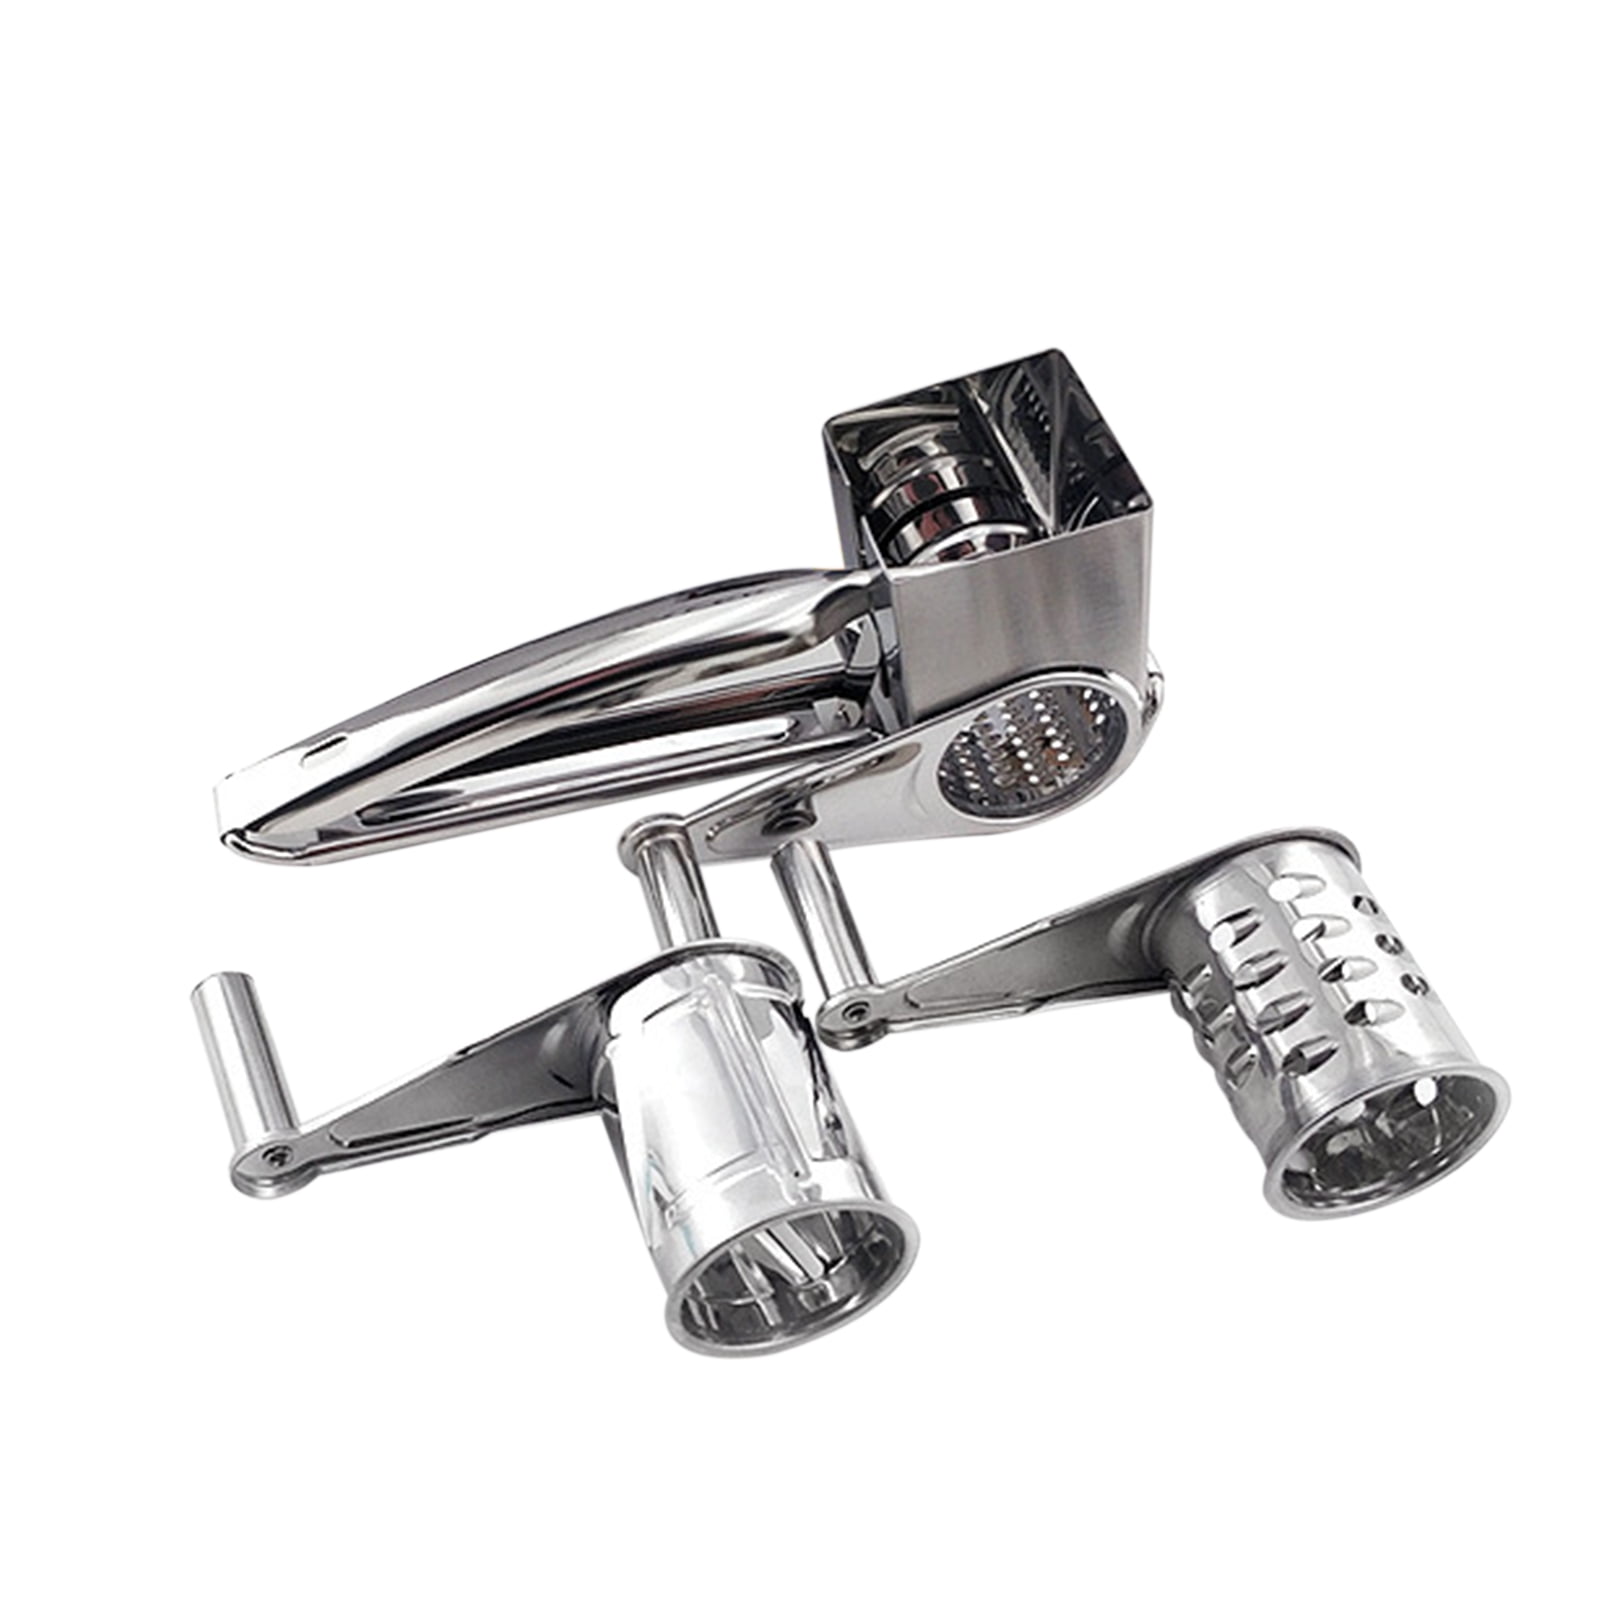 FMP 137-1090 Hand-Crank Cheese Grater